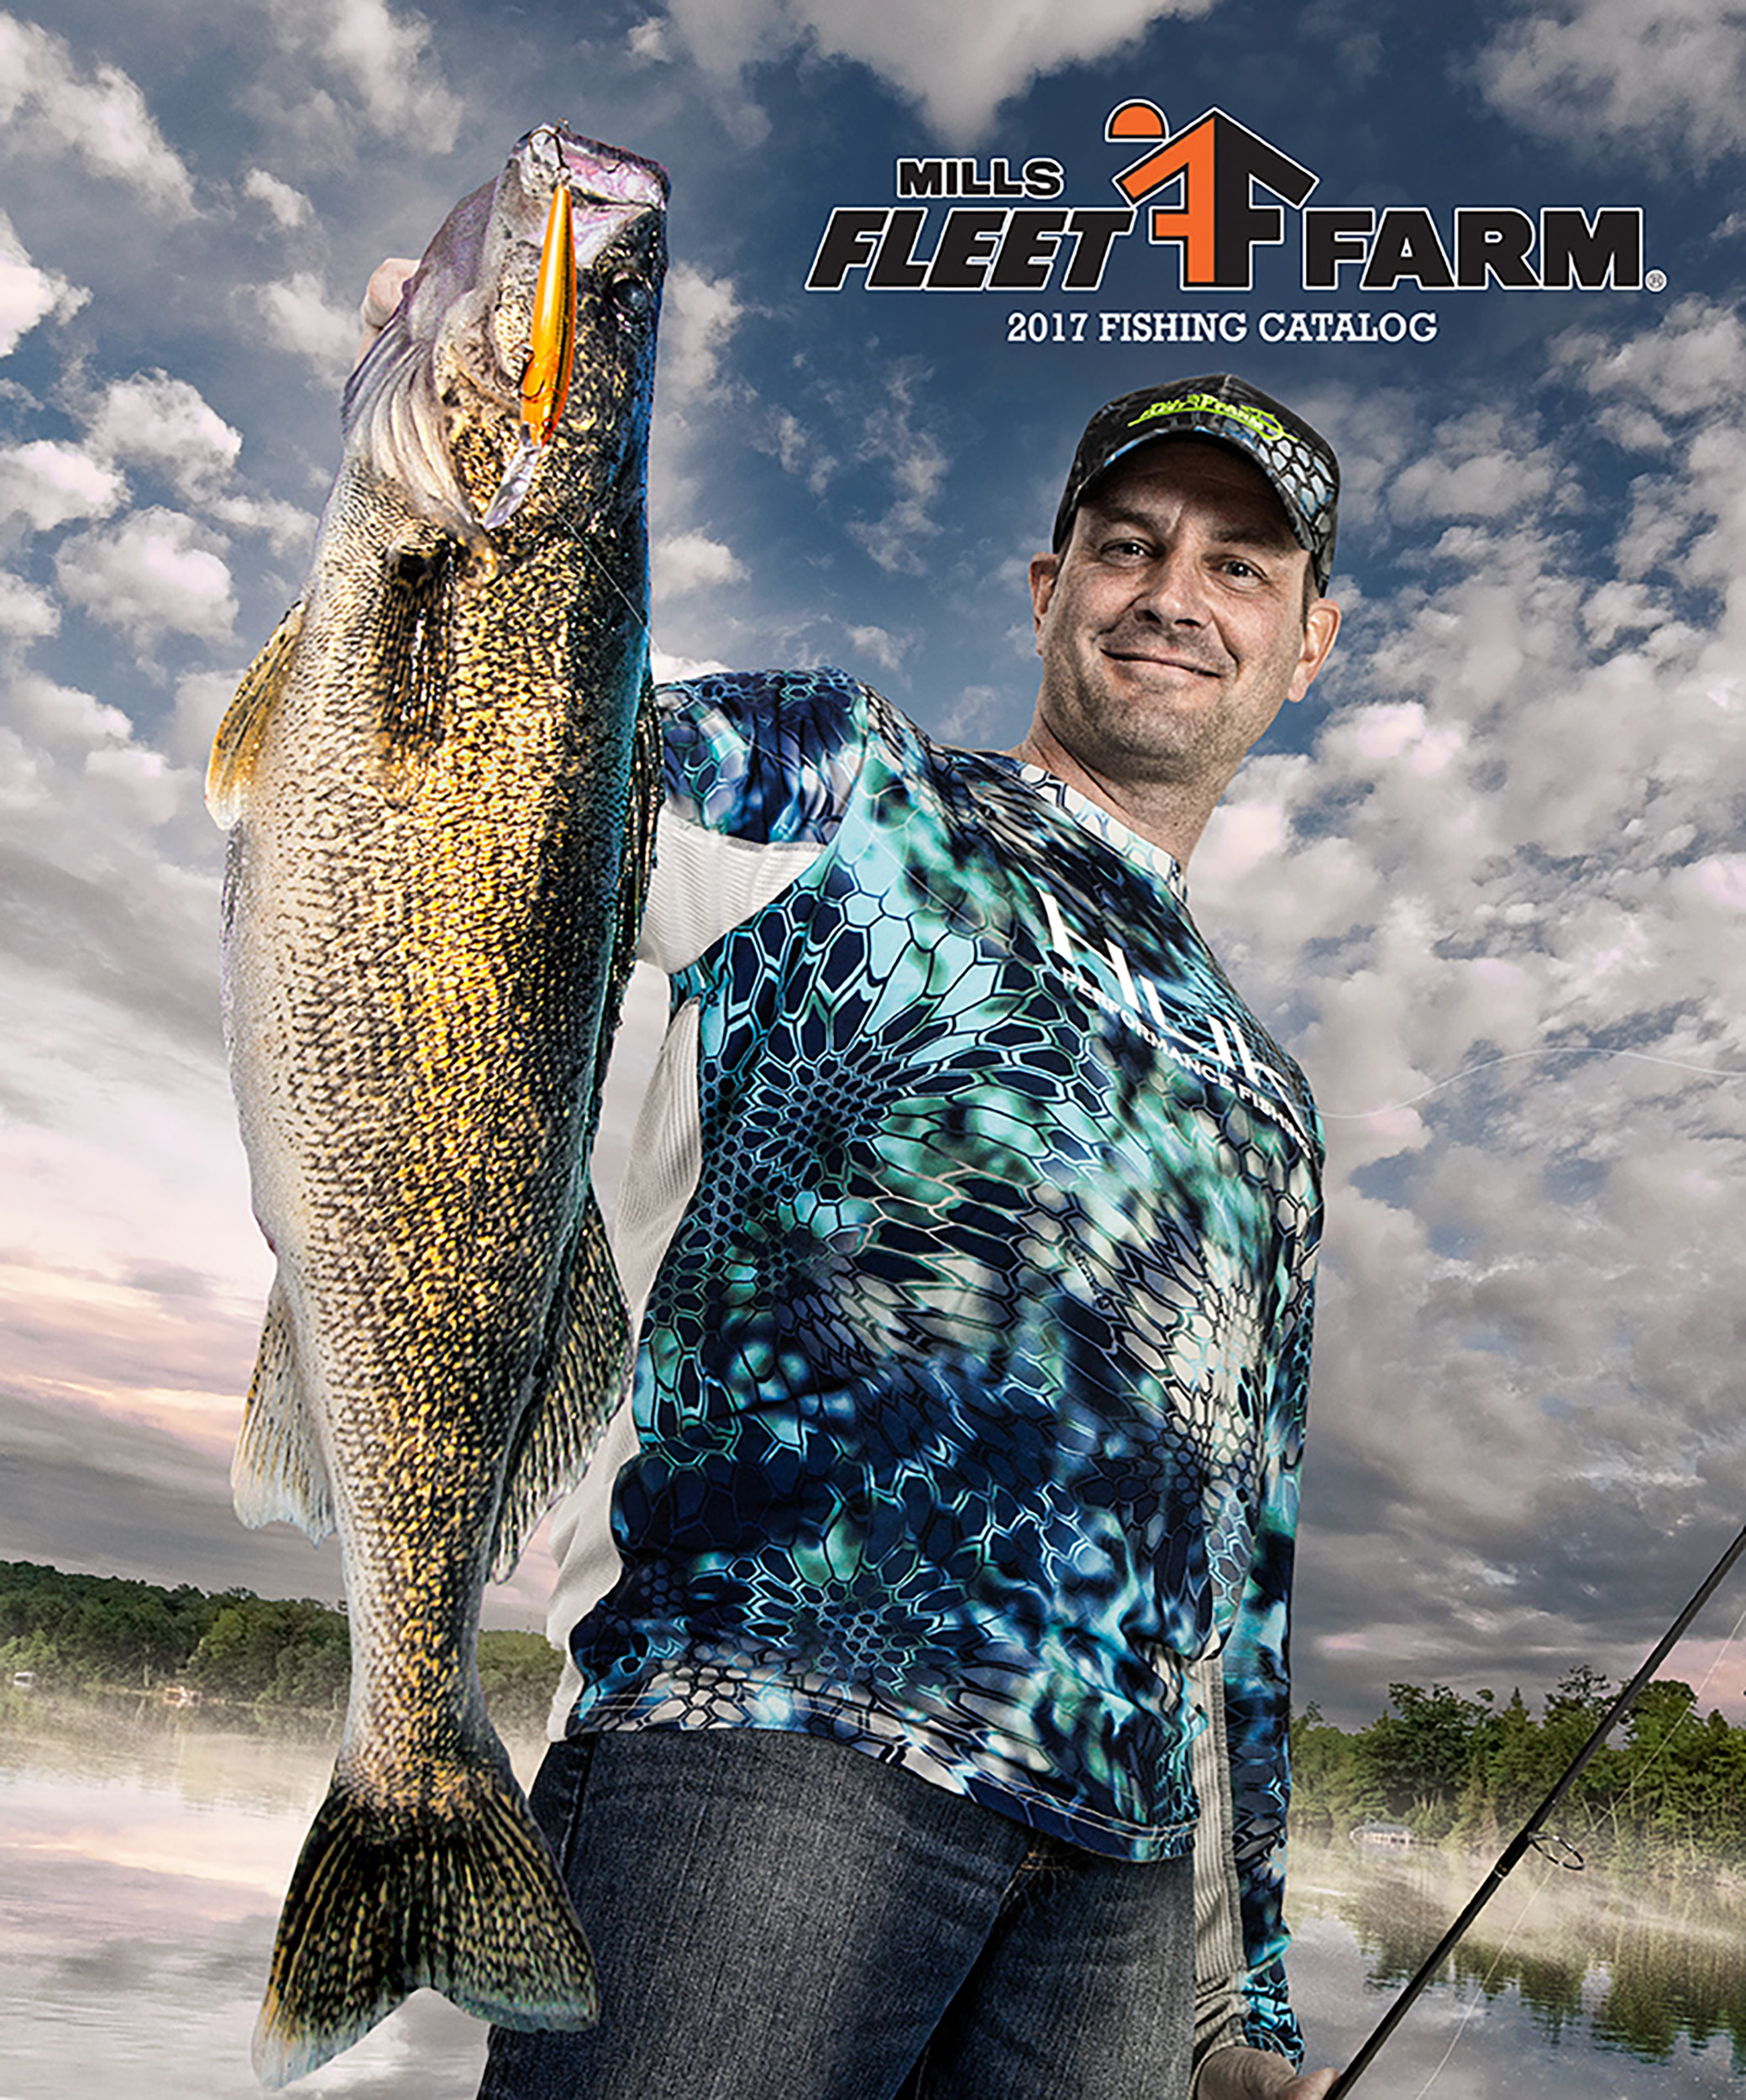 Man holding a fish for the Mills Fleet Farm Fishing Catalog Cover Image Photography